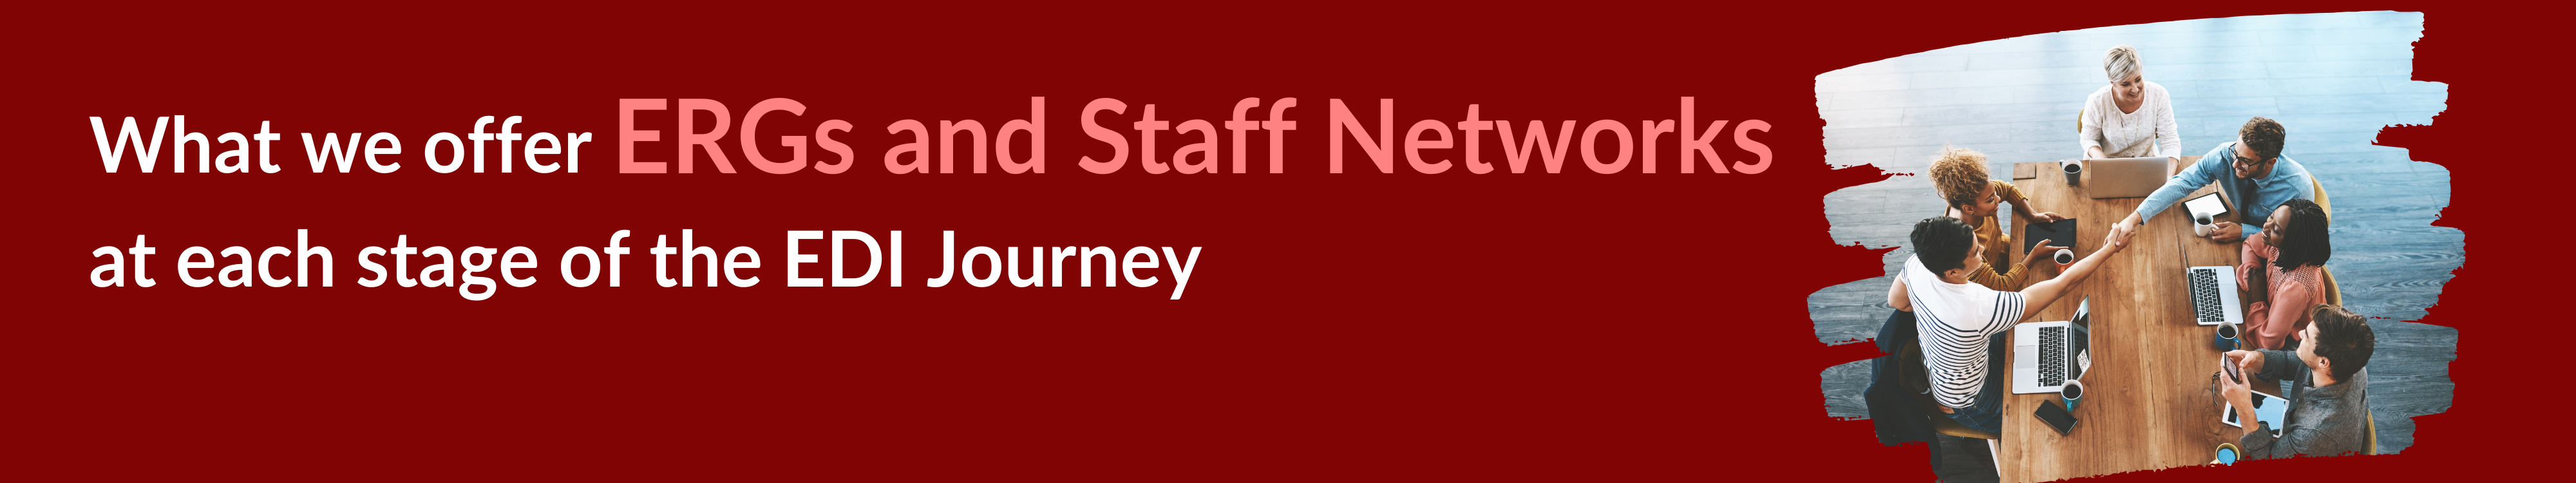 ERGs staff networks